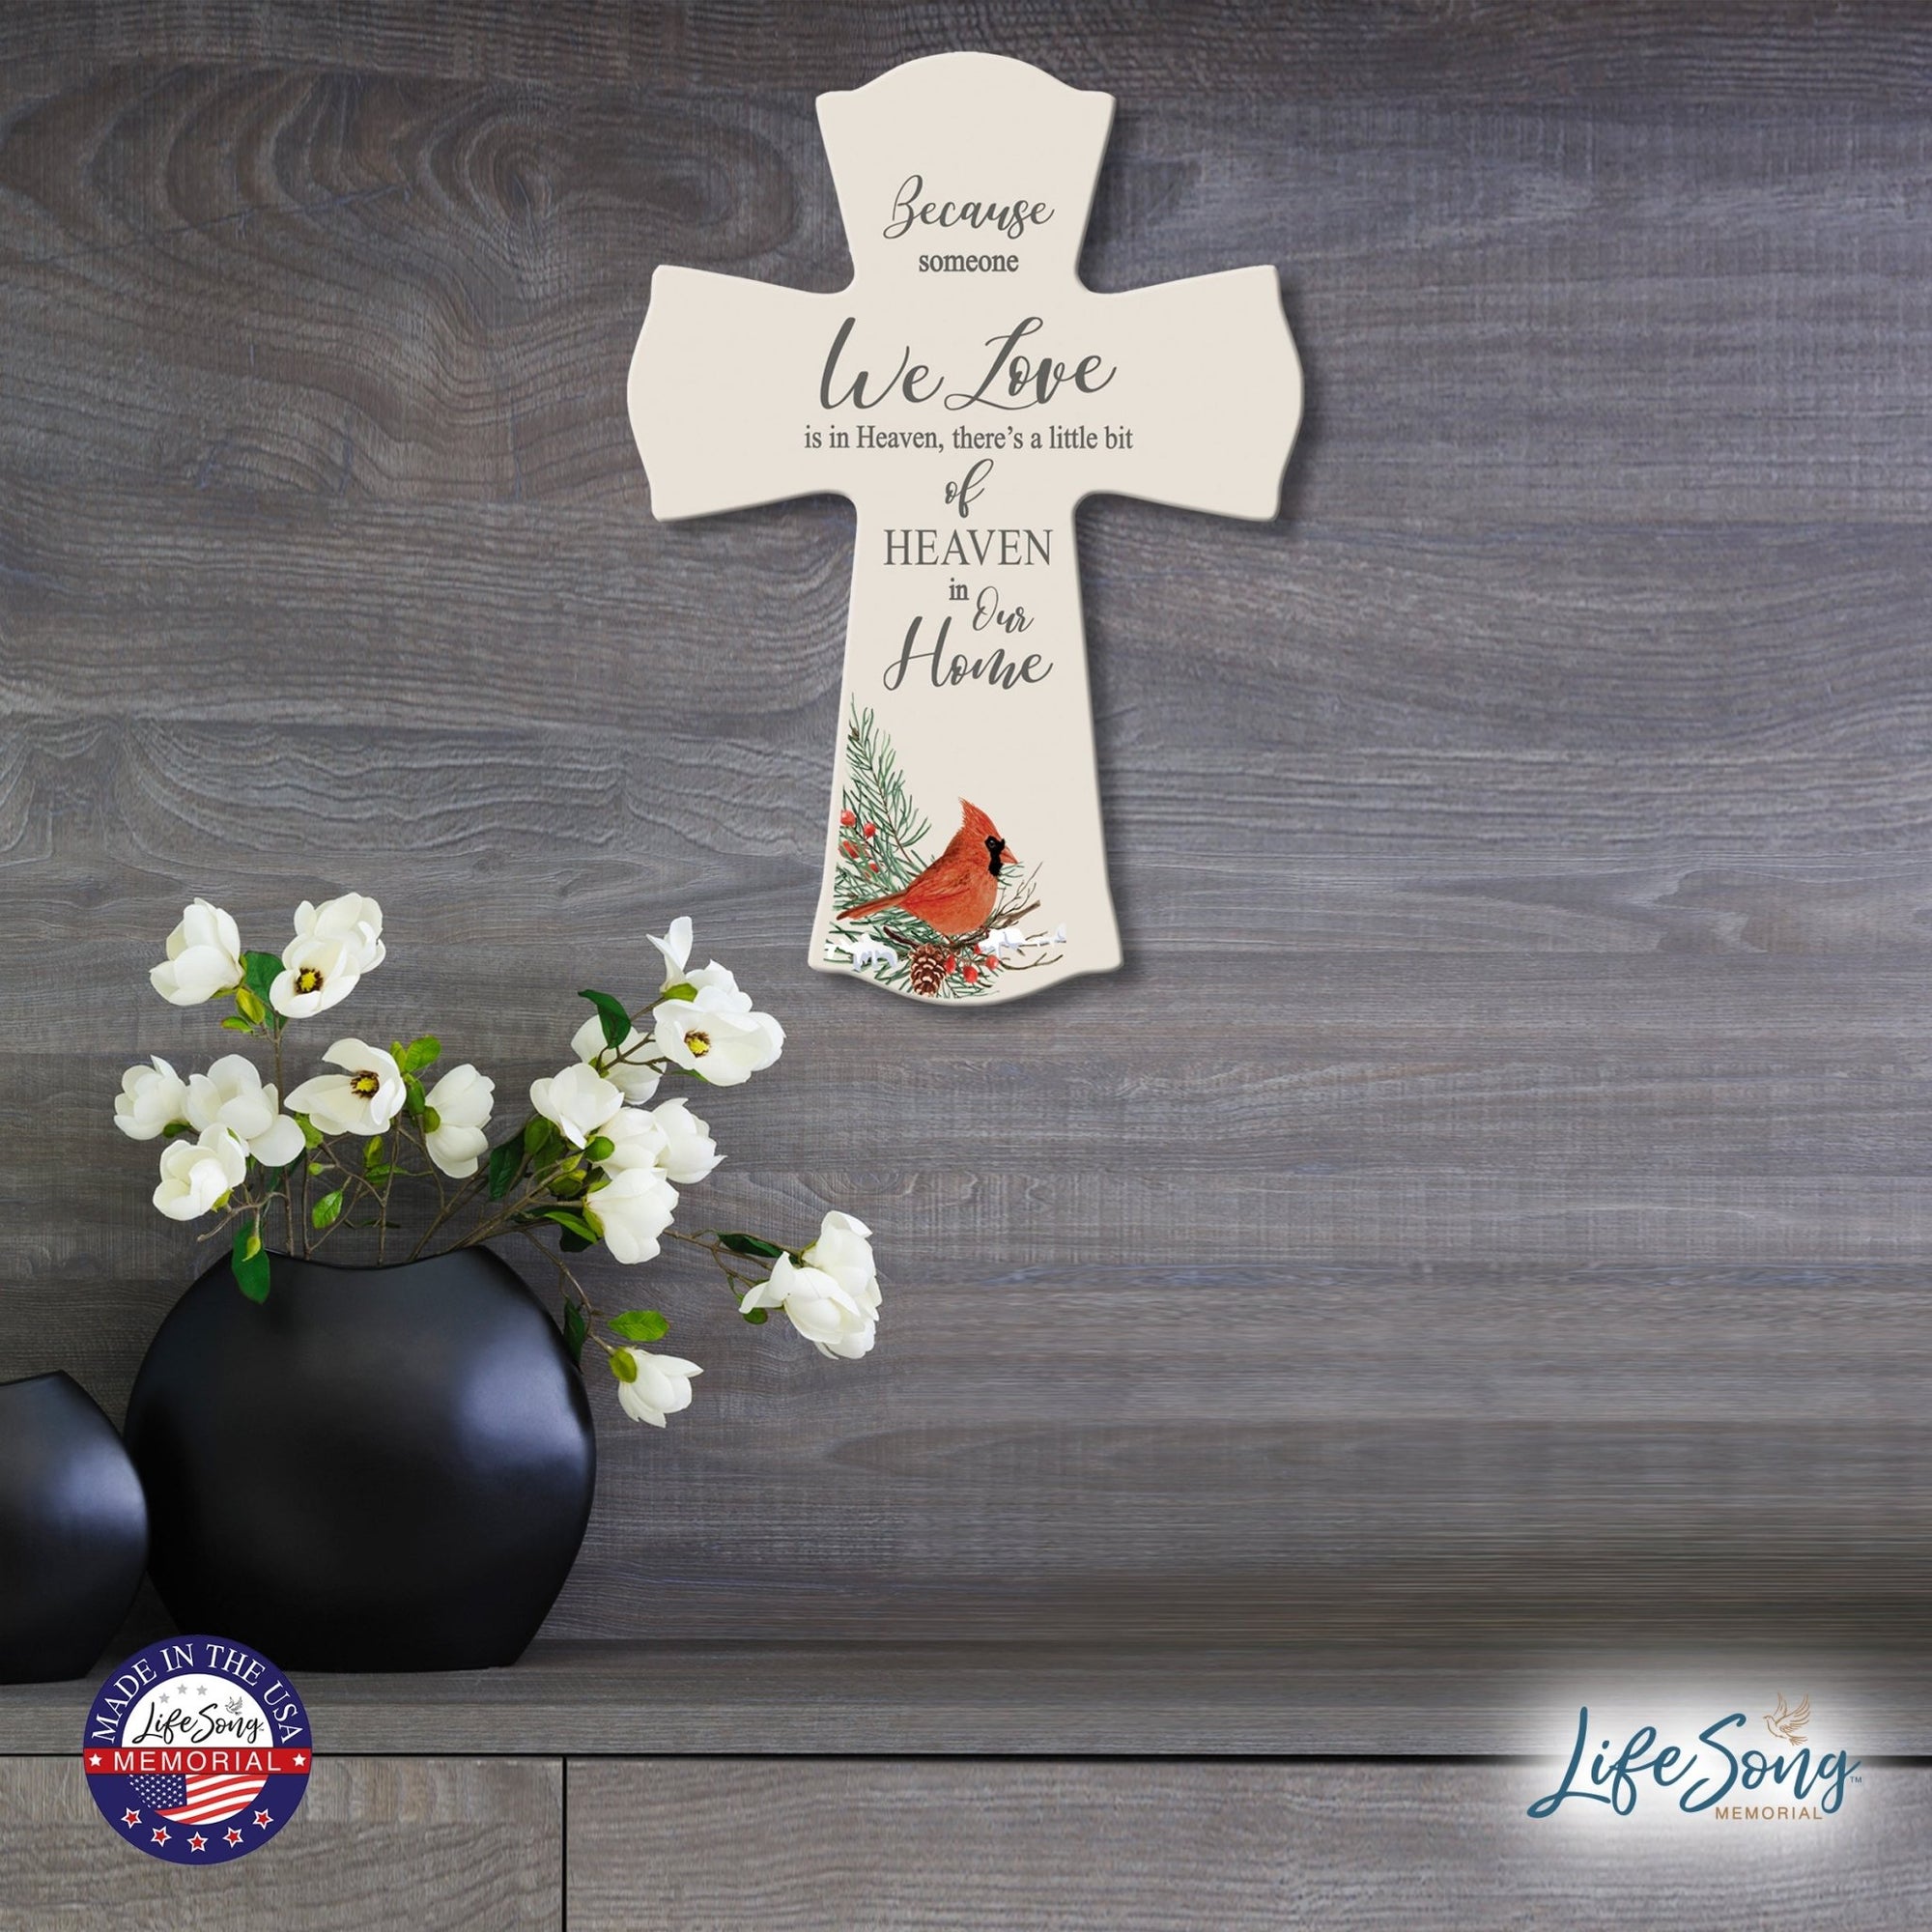 Memorial Wooden Wall Cross 8x11 Cardinal Bereavement Gift for Loss on Loved One – Because Someone We Love - LifeSong Milestones